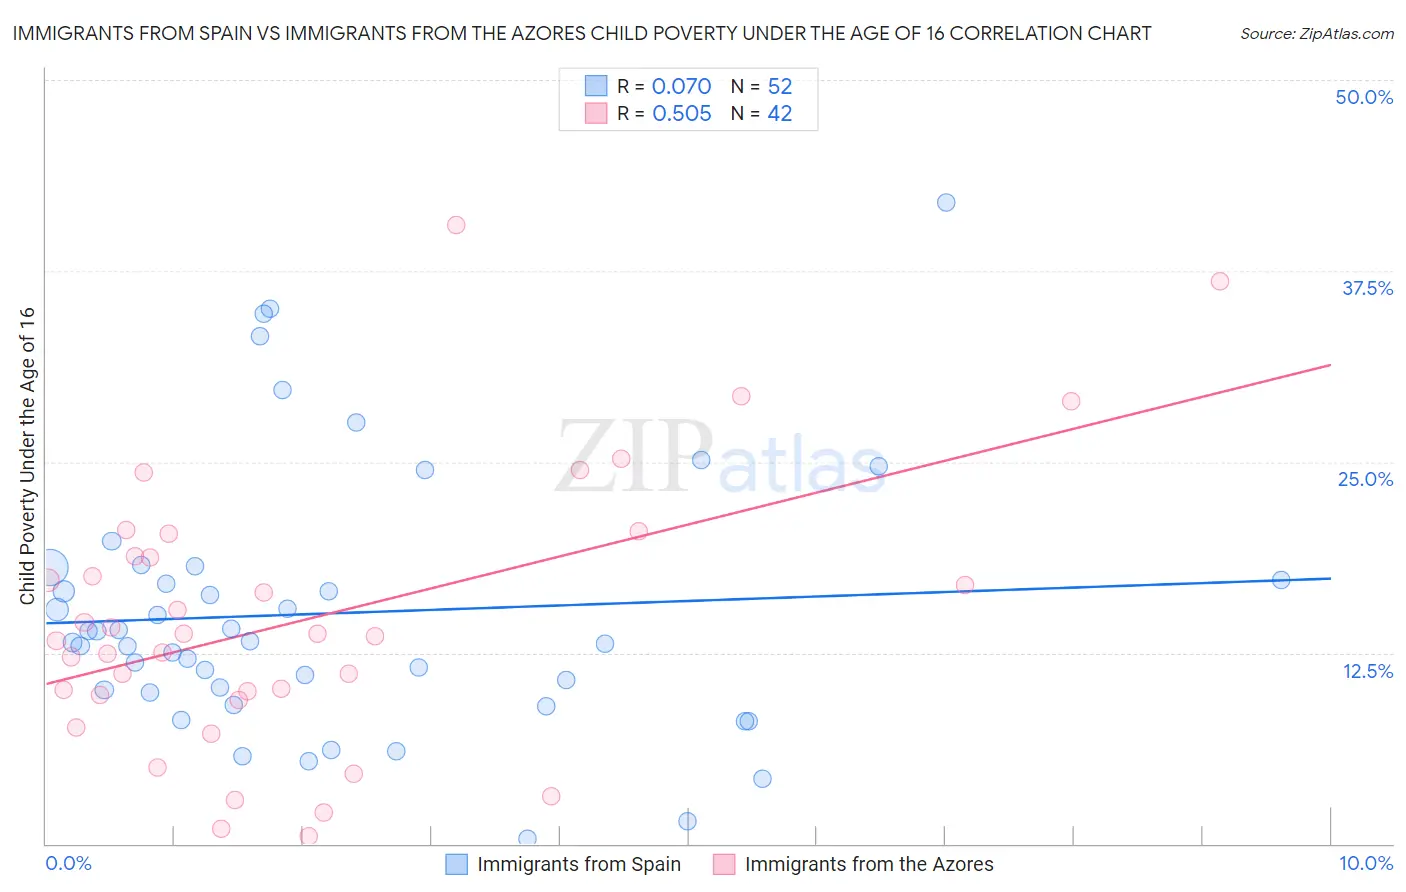 Immigrants from Spain vs Immigrants from the Azores Child Poverty Under the Age of 16